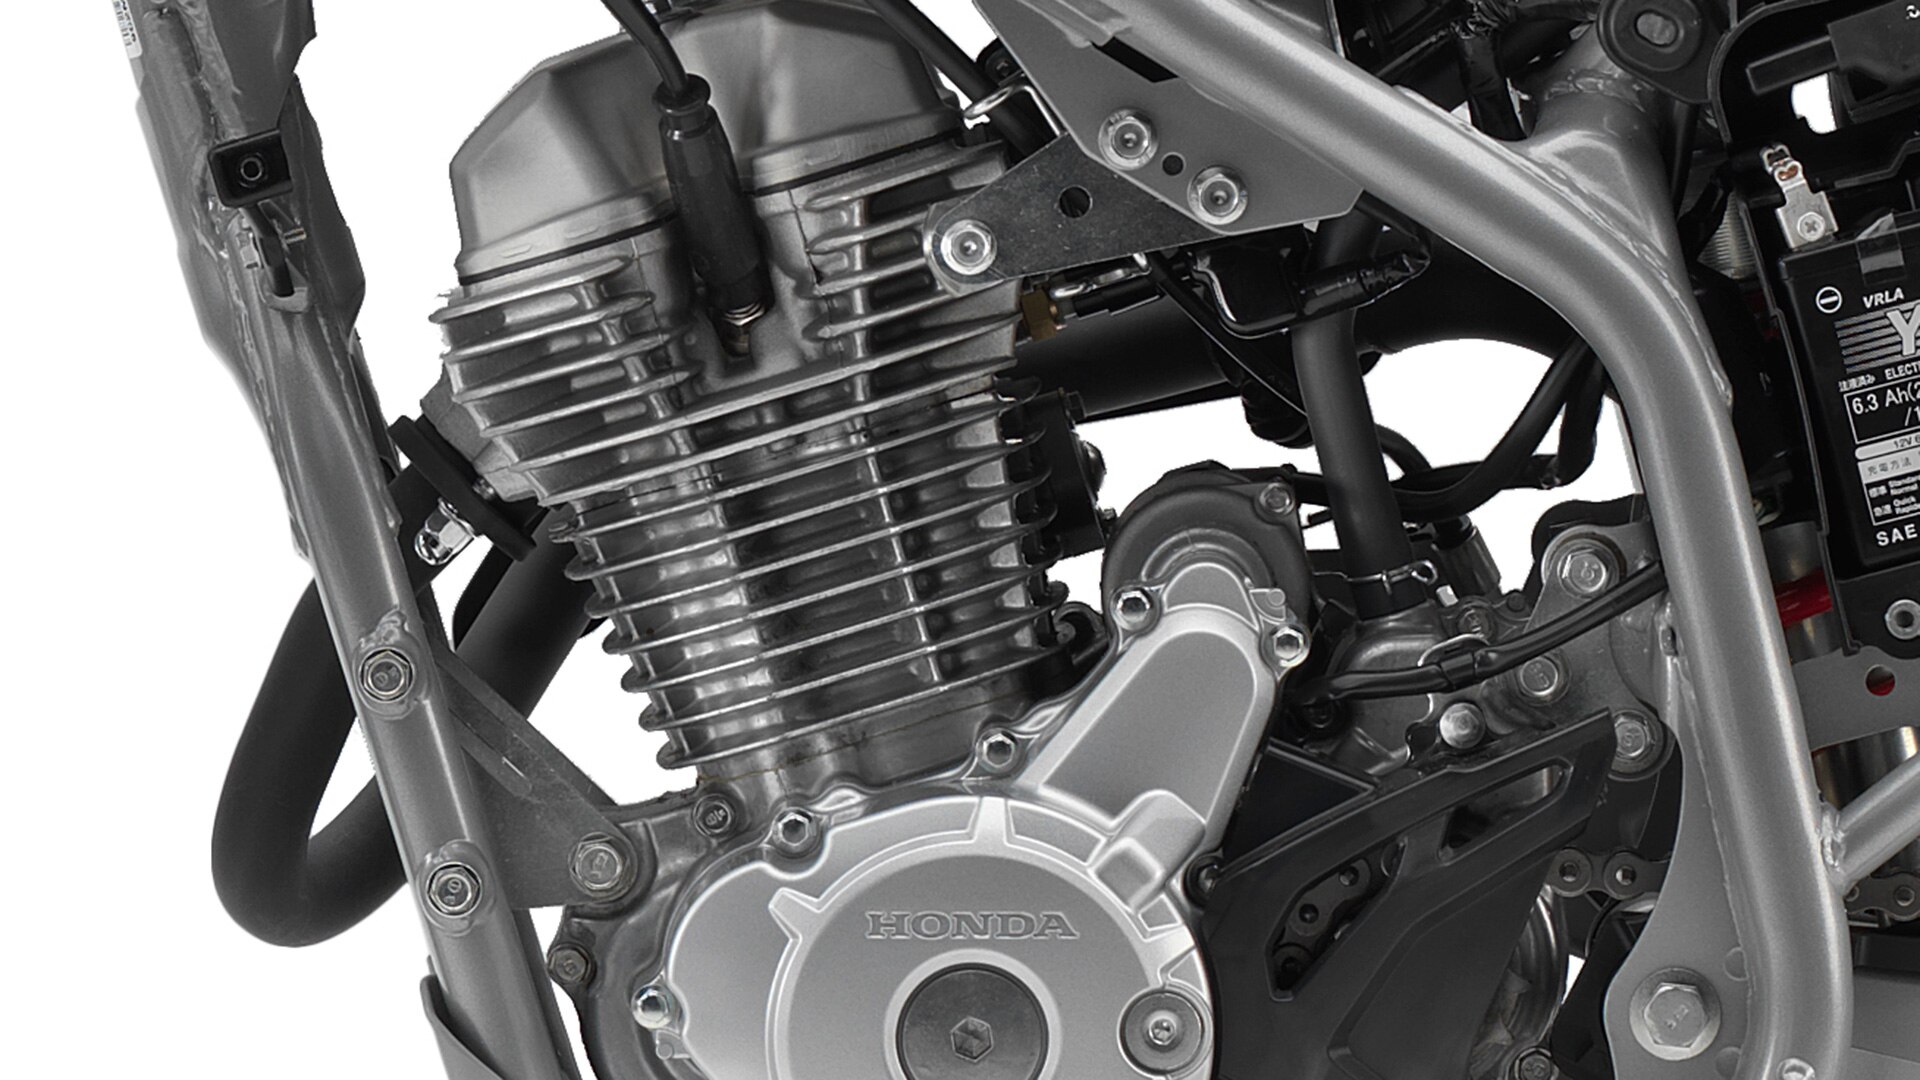 Close-up of 4-stroke air-cooled single-cylinder 250 cc engine.